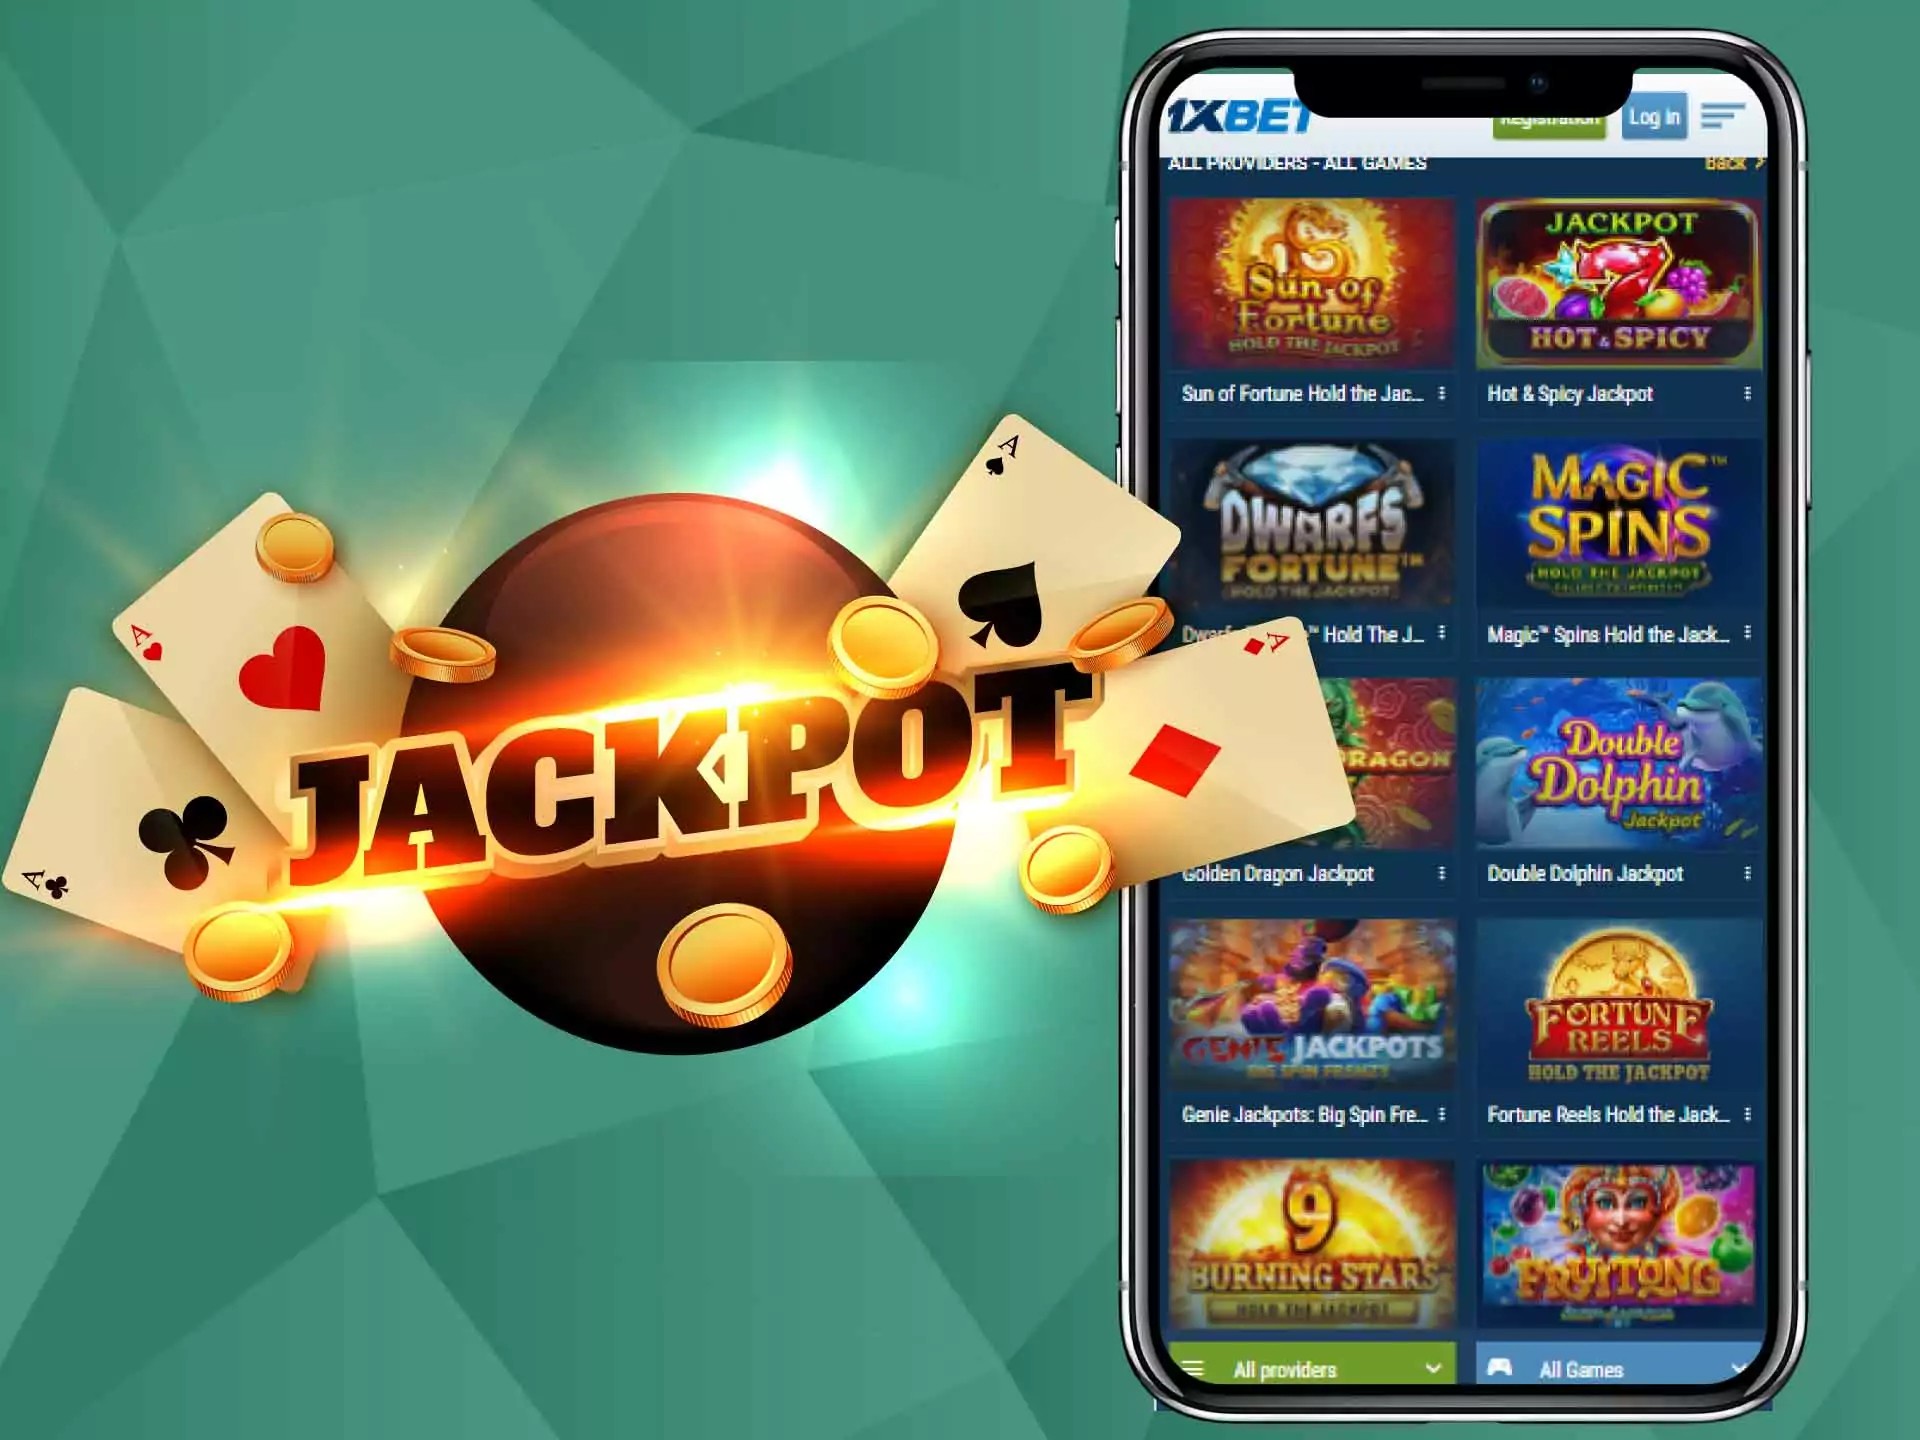 Play specific games and try to win jackpots.